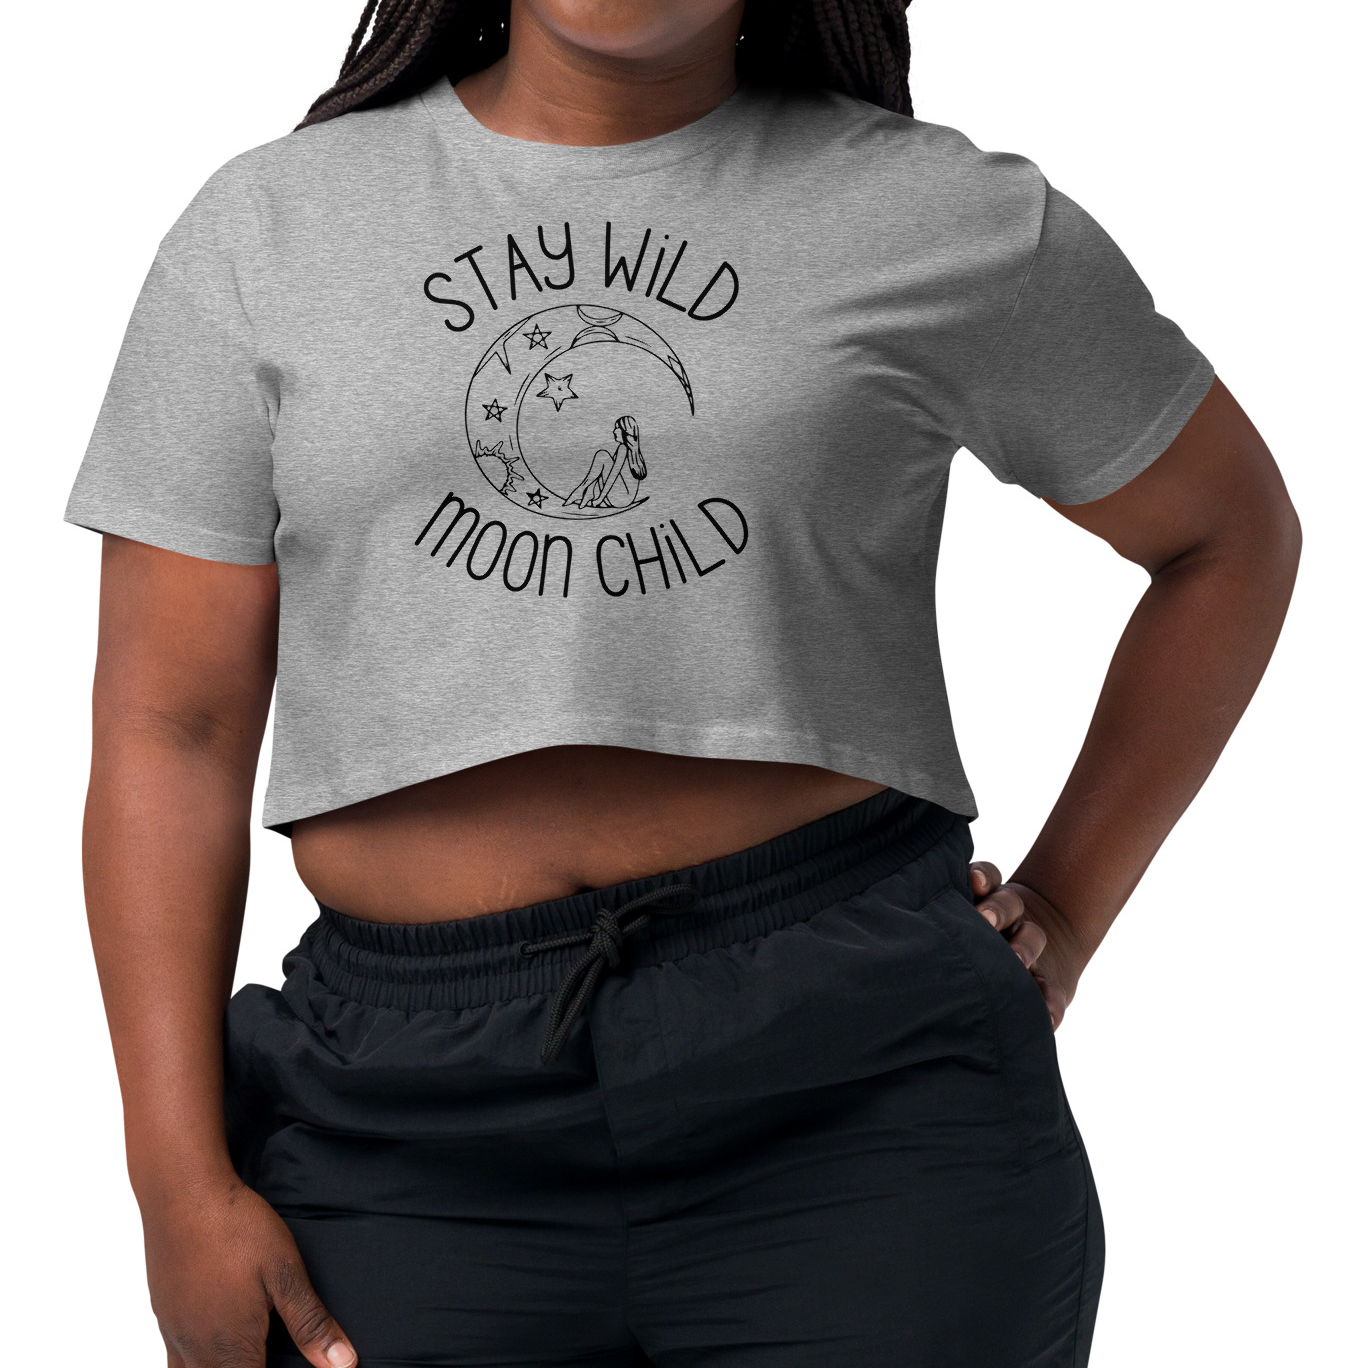 stay wild moon child cropped shirt